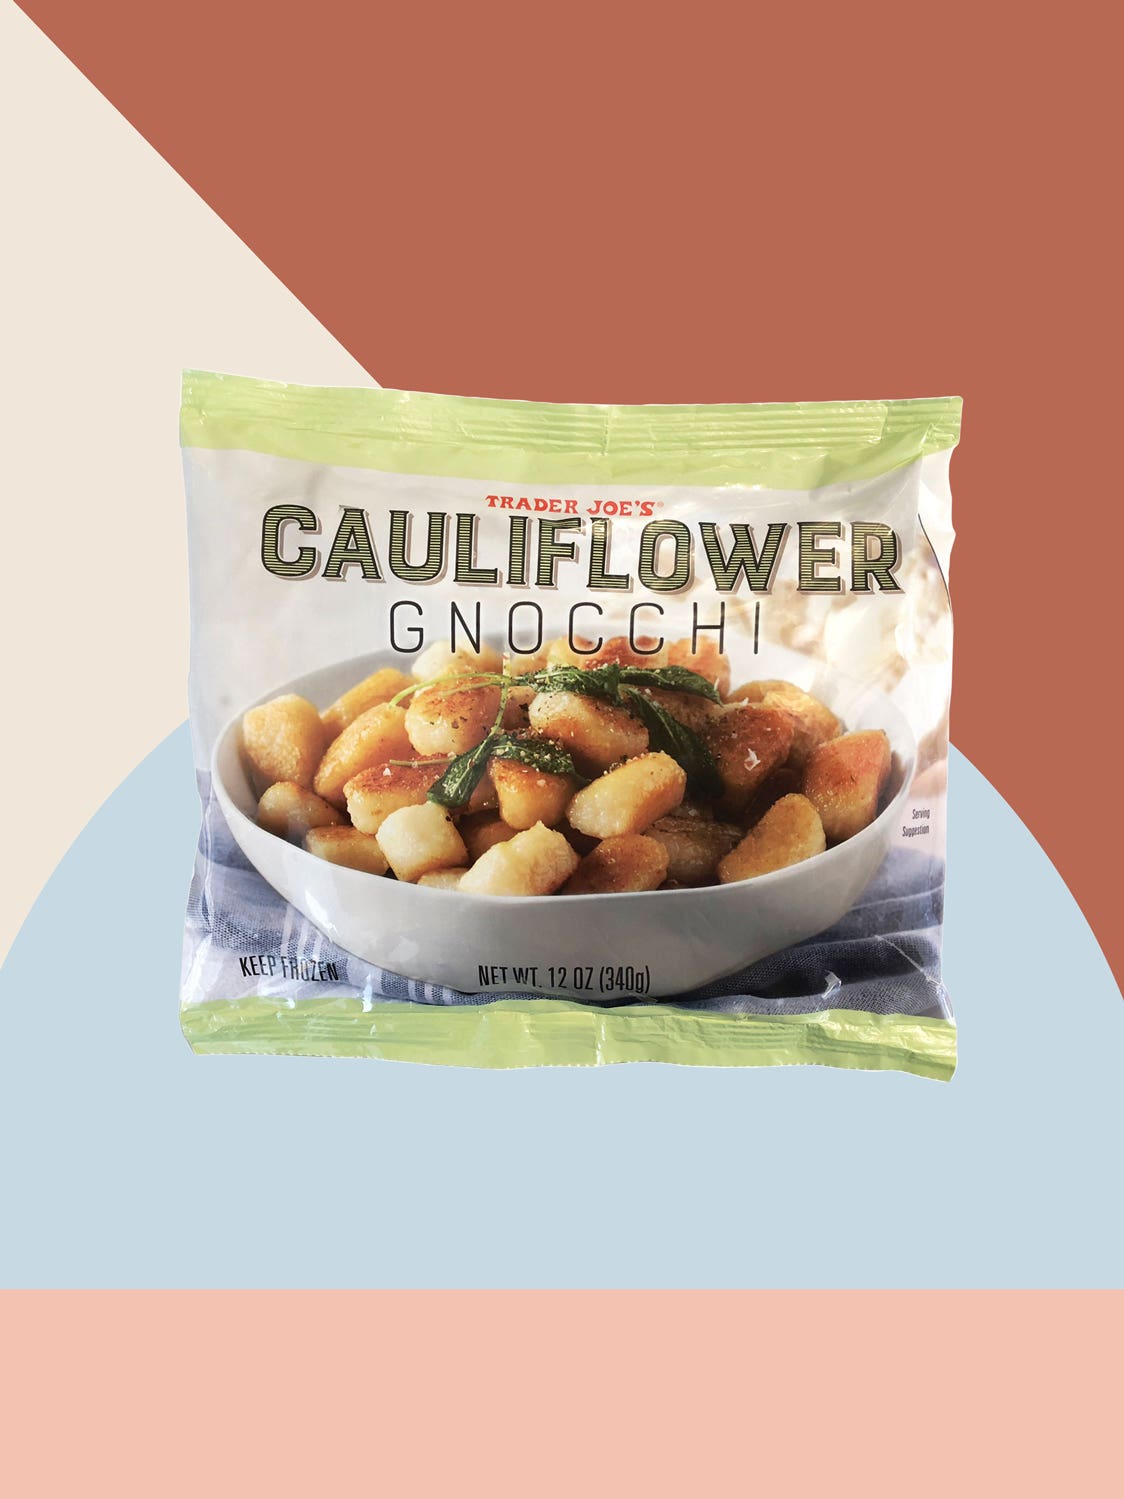 The Easy Hack That’ll Take Your Trader Joe’s Cauliflower Gnocchi to the Next Level